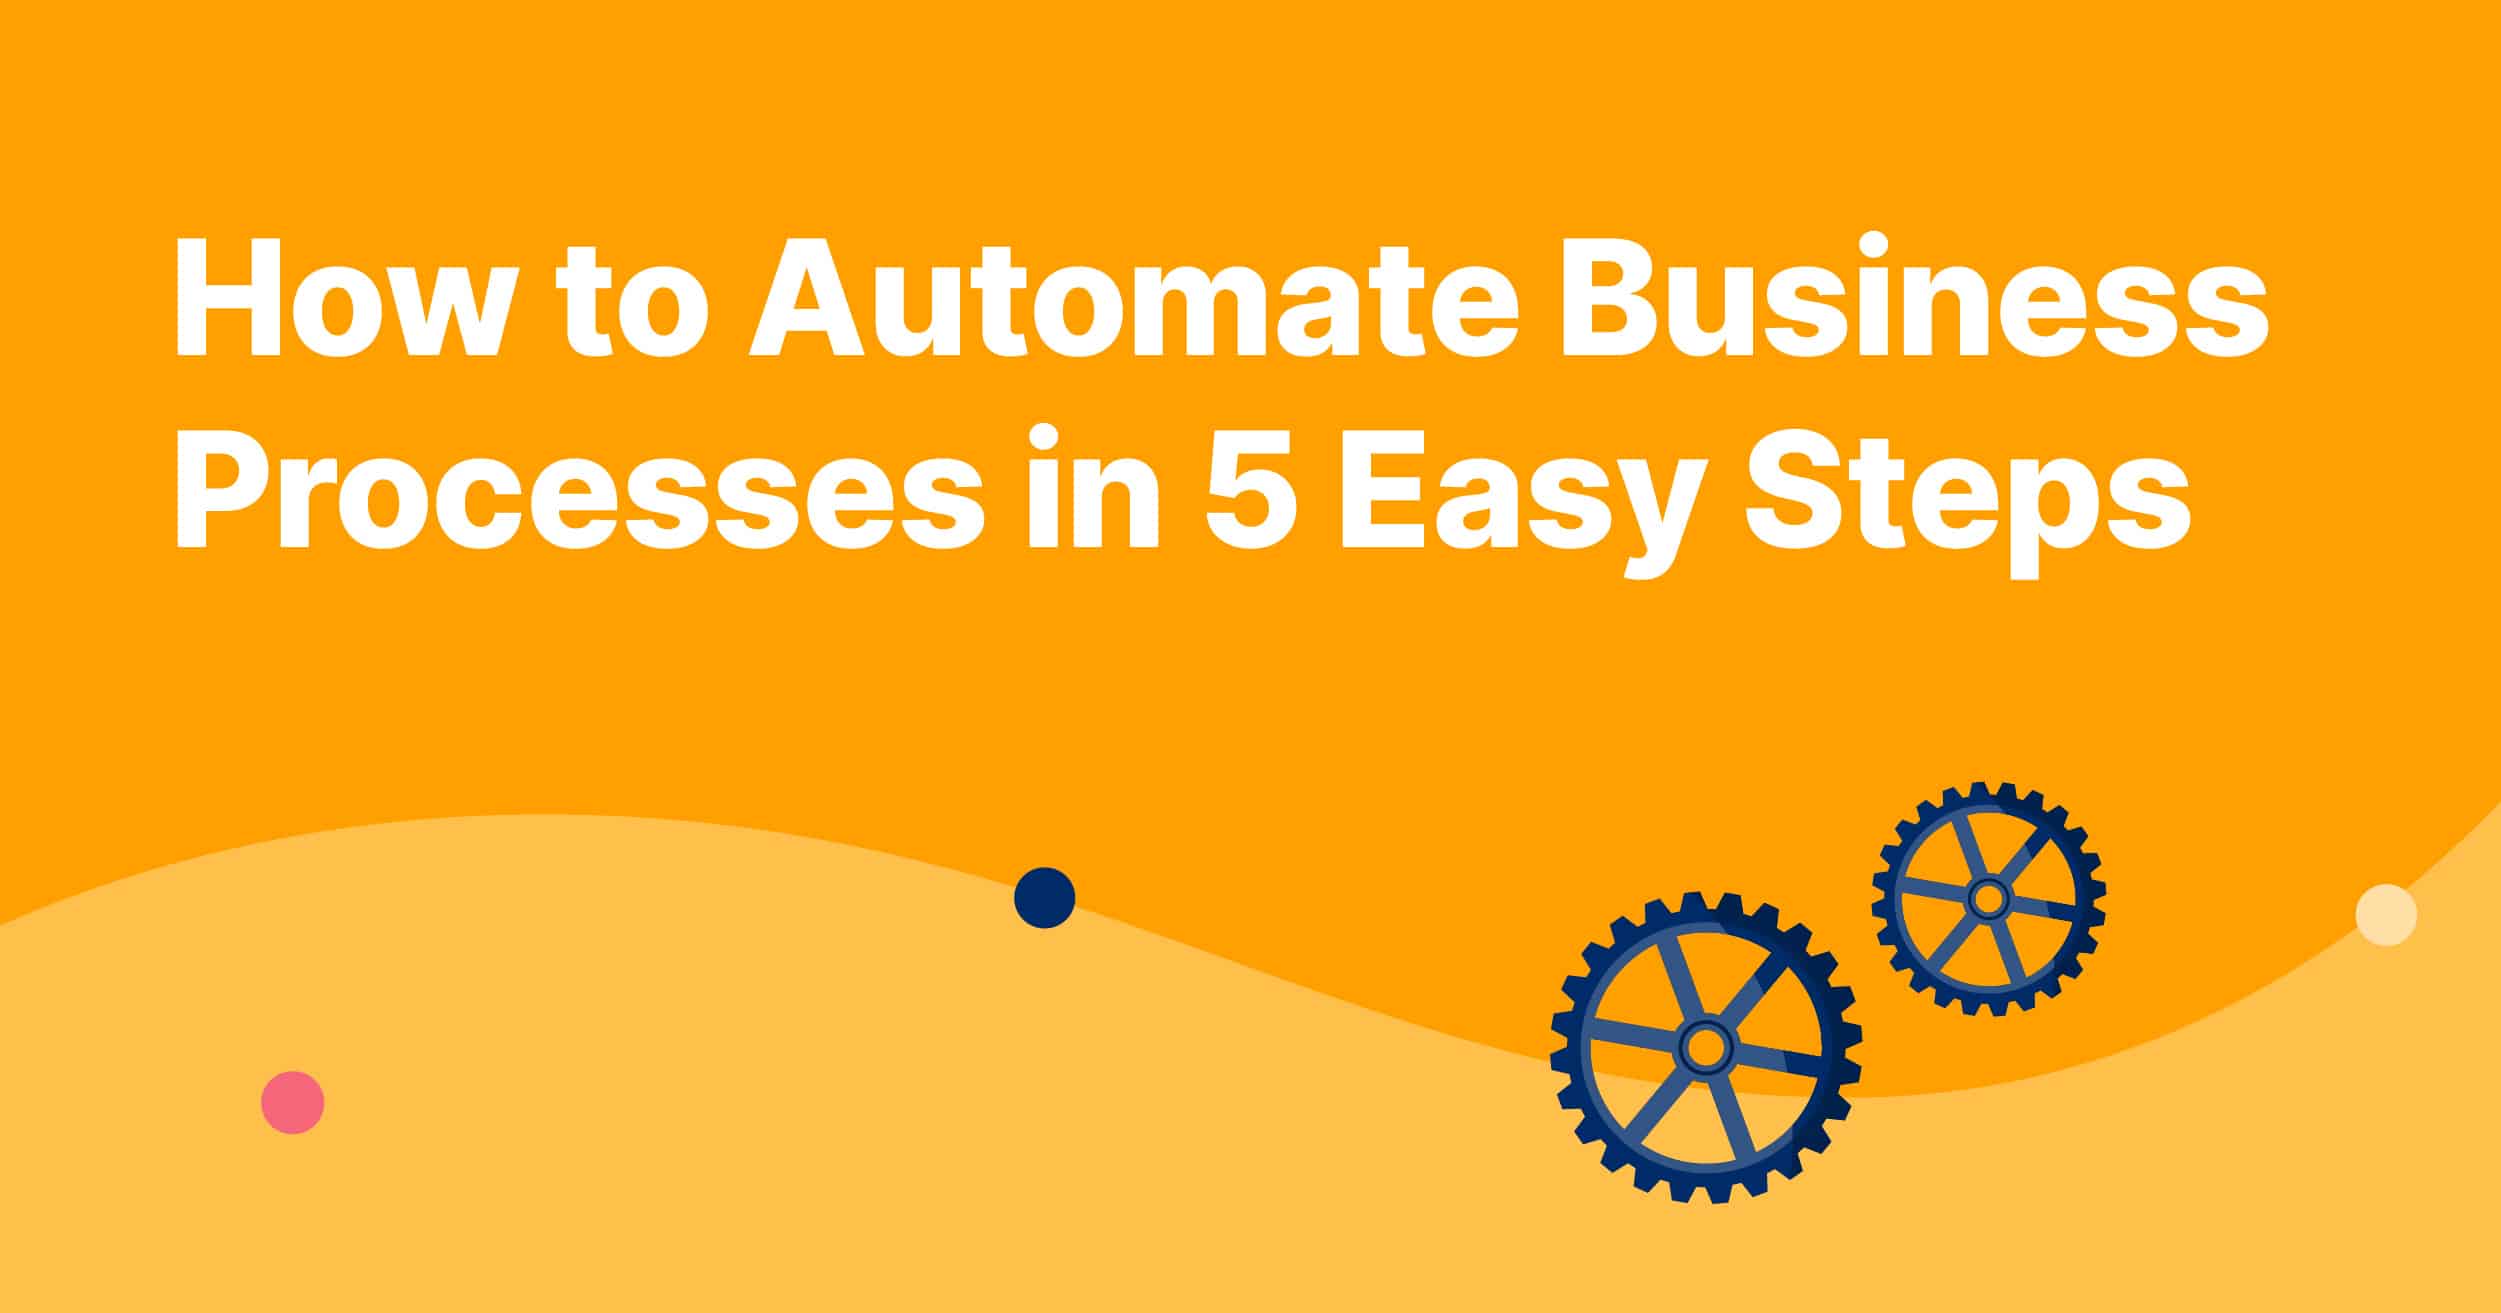 Header image that describes how to automate business processes in 5 steps